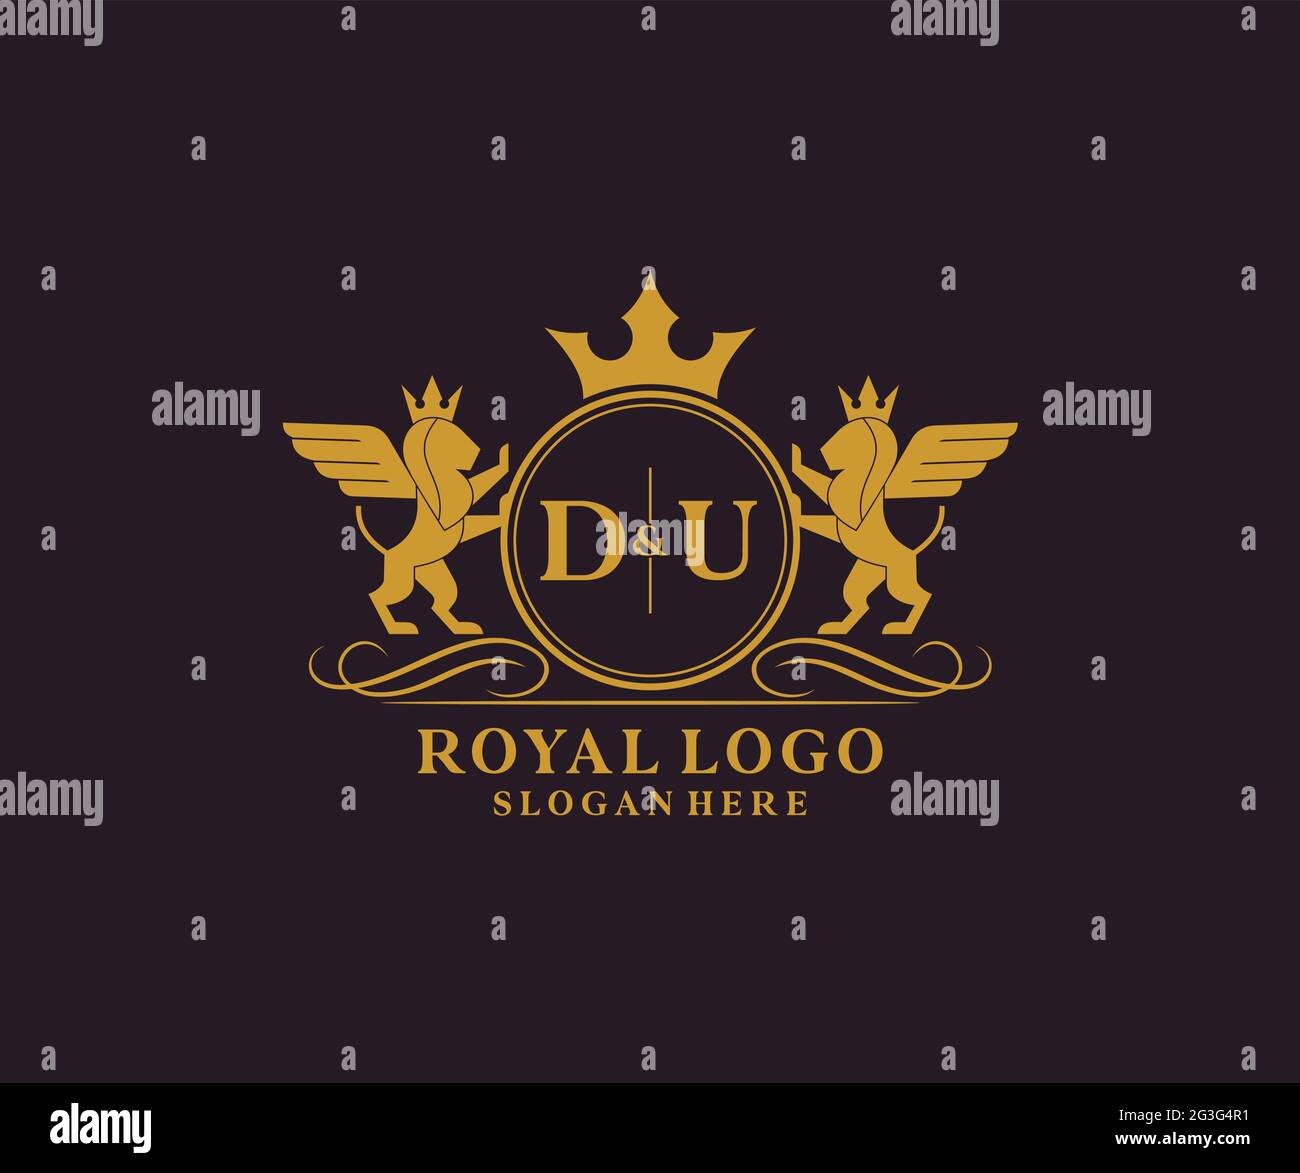 DU Letter Lion Royal Luxury Heraldic,Crest Logo template in vector art for Restaurant, Royalty, Boutique, Cafe, Hotel, Heraldic, Jewelry, Fashion and Stock Vector